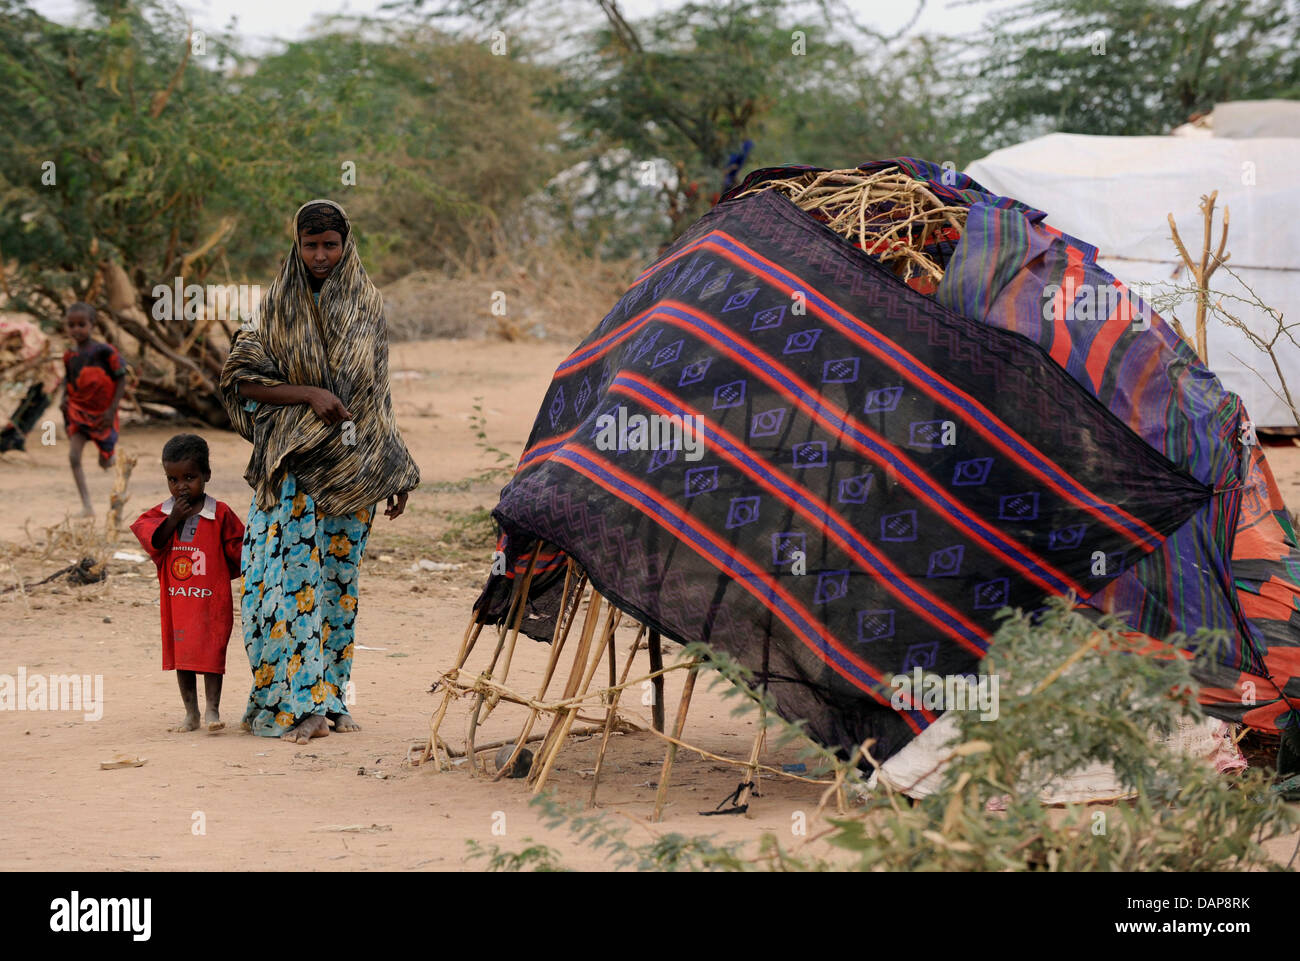 Somalian refugees walk past their tents in a refugee camp in Dadaab, northeastern Kenya on Tuesday, August 2nd 2011. Somalia and parts of Kenya have been struck by one of the worst droughts and famines in six decades, more than 350.000 refugees have found shelter in the worlds biggest refugee camp. Foto: Boris Roessler dpa  +++(c) dpa - Bildfunk+++ Stock Photo